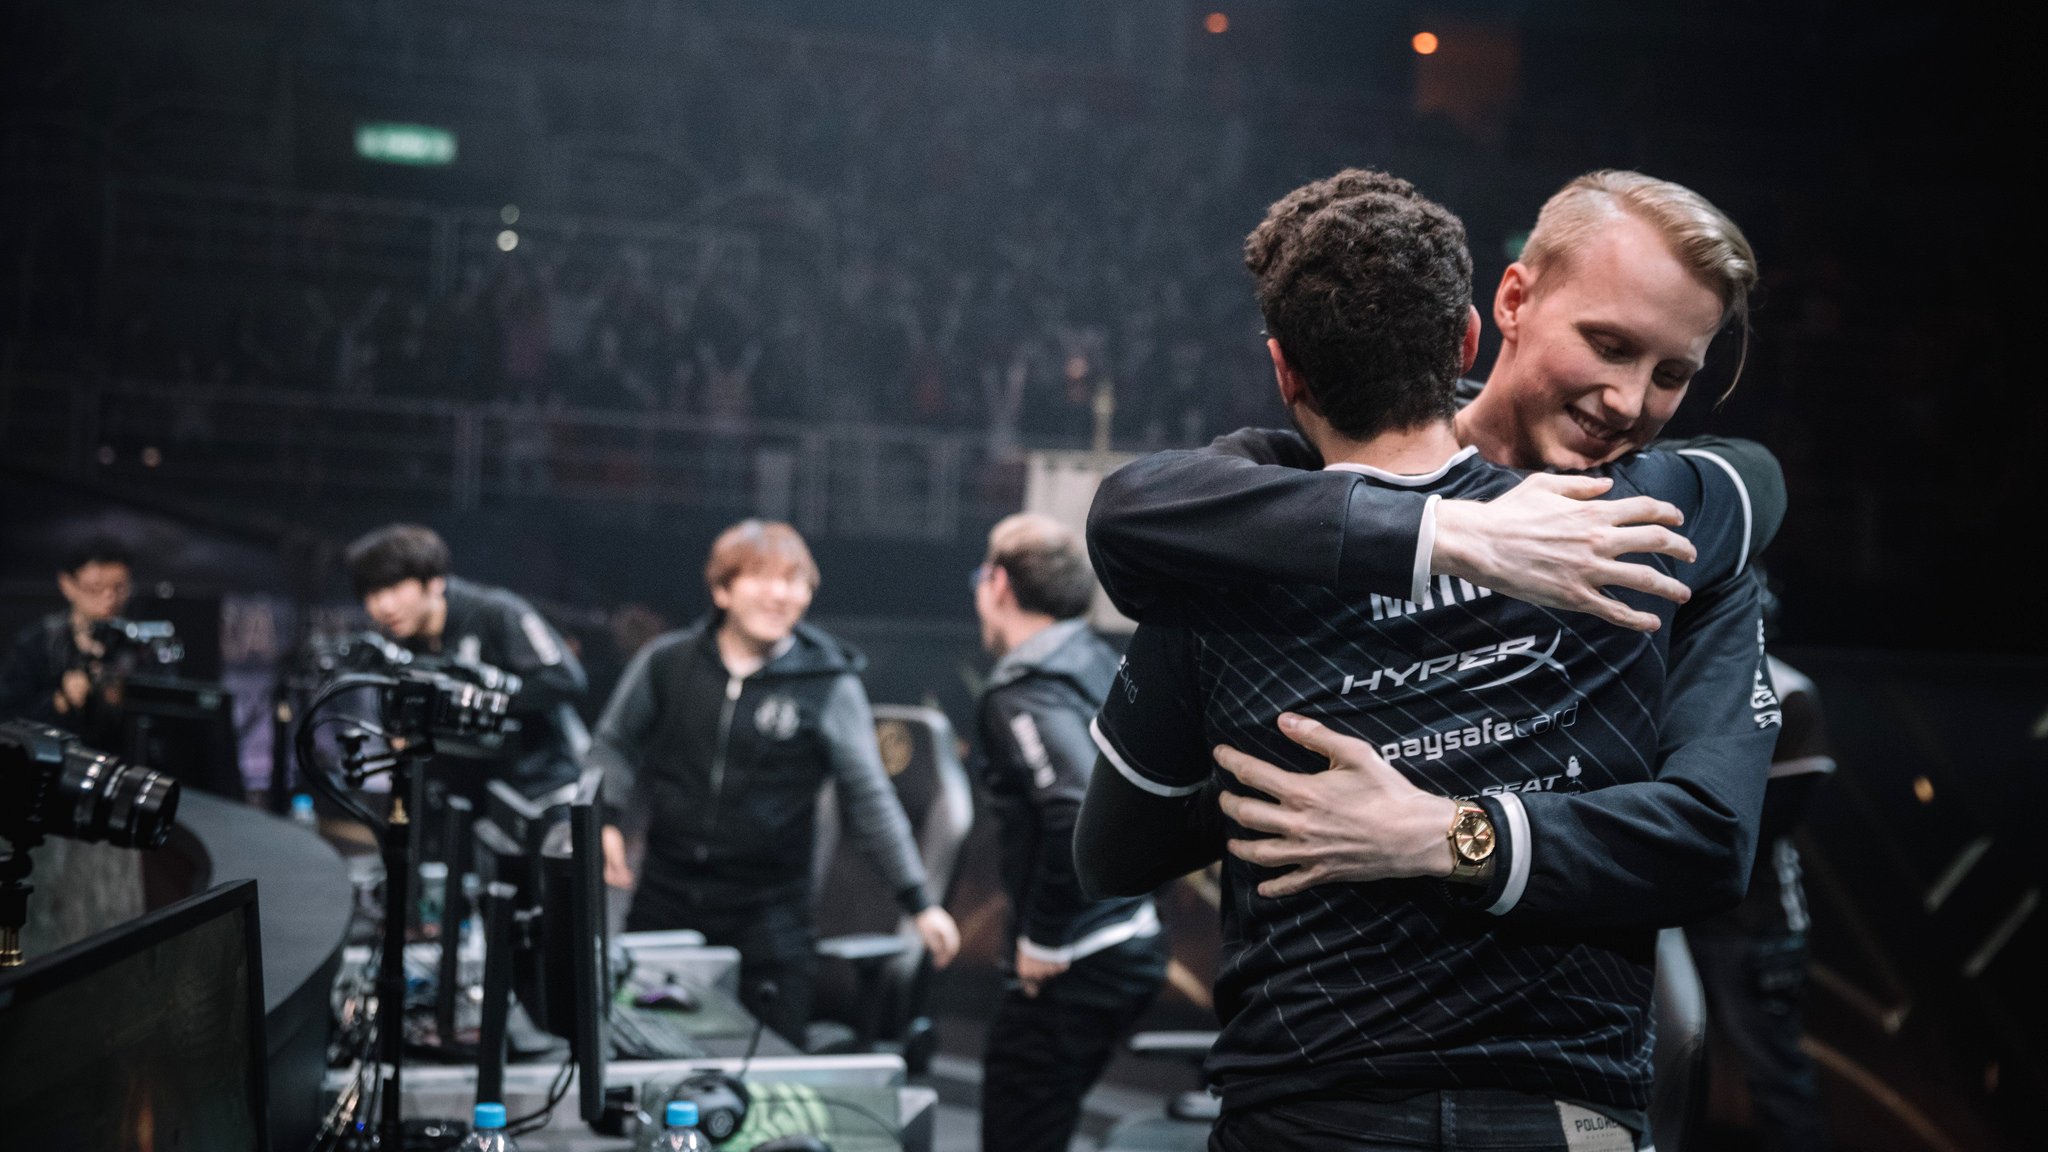 Sources: FLAnalista Reven has reached a verbal agreement with TSM